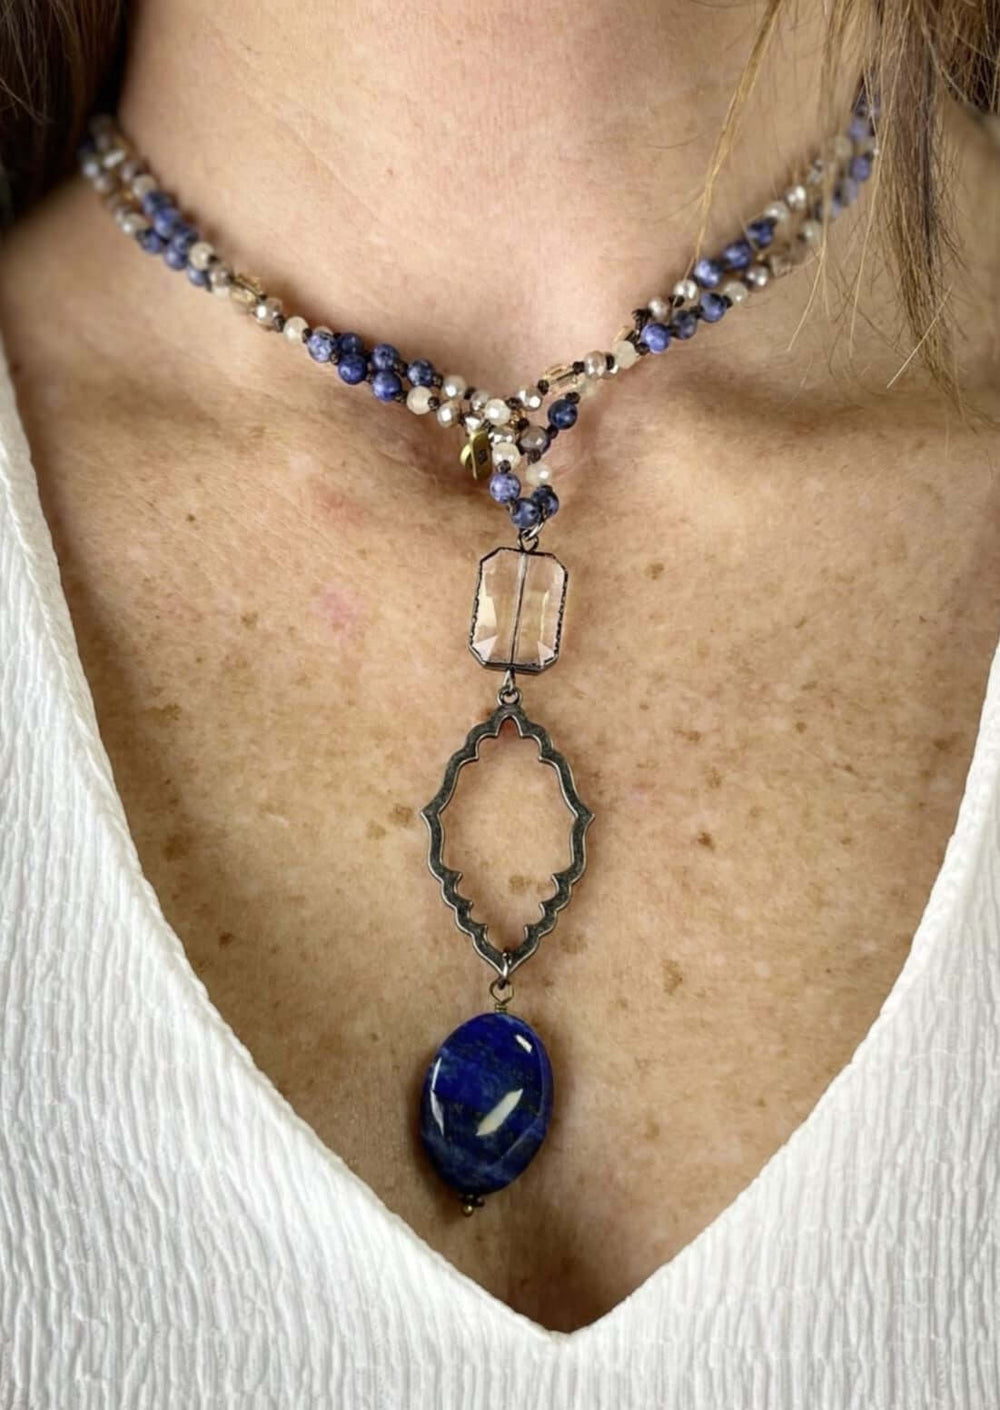 USA Made Ladies Blue Stone Pendant Natural Stone Charm Necklace Where Long or Short | Fashion Jewelry Handmade in Texas by Carol Su | Made in America Boutique